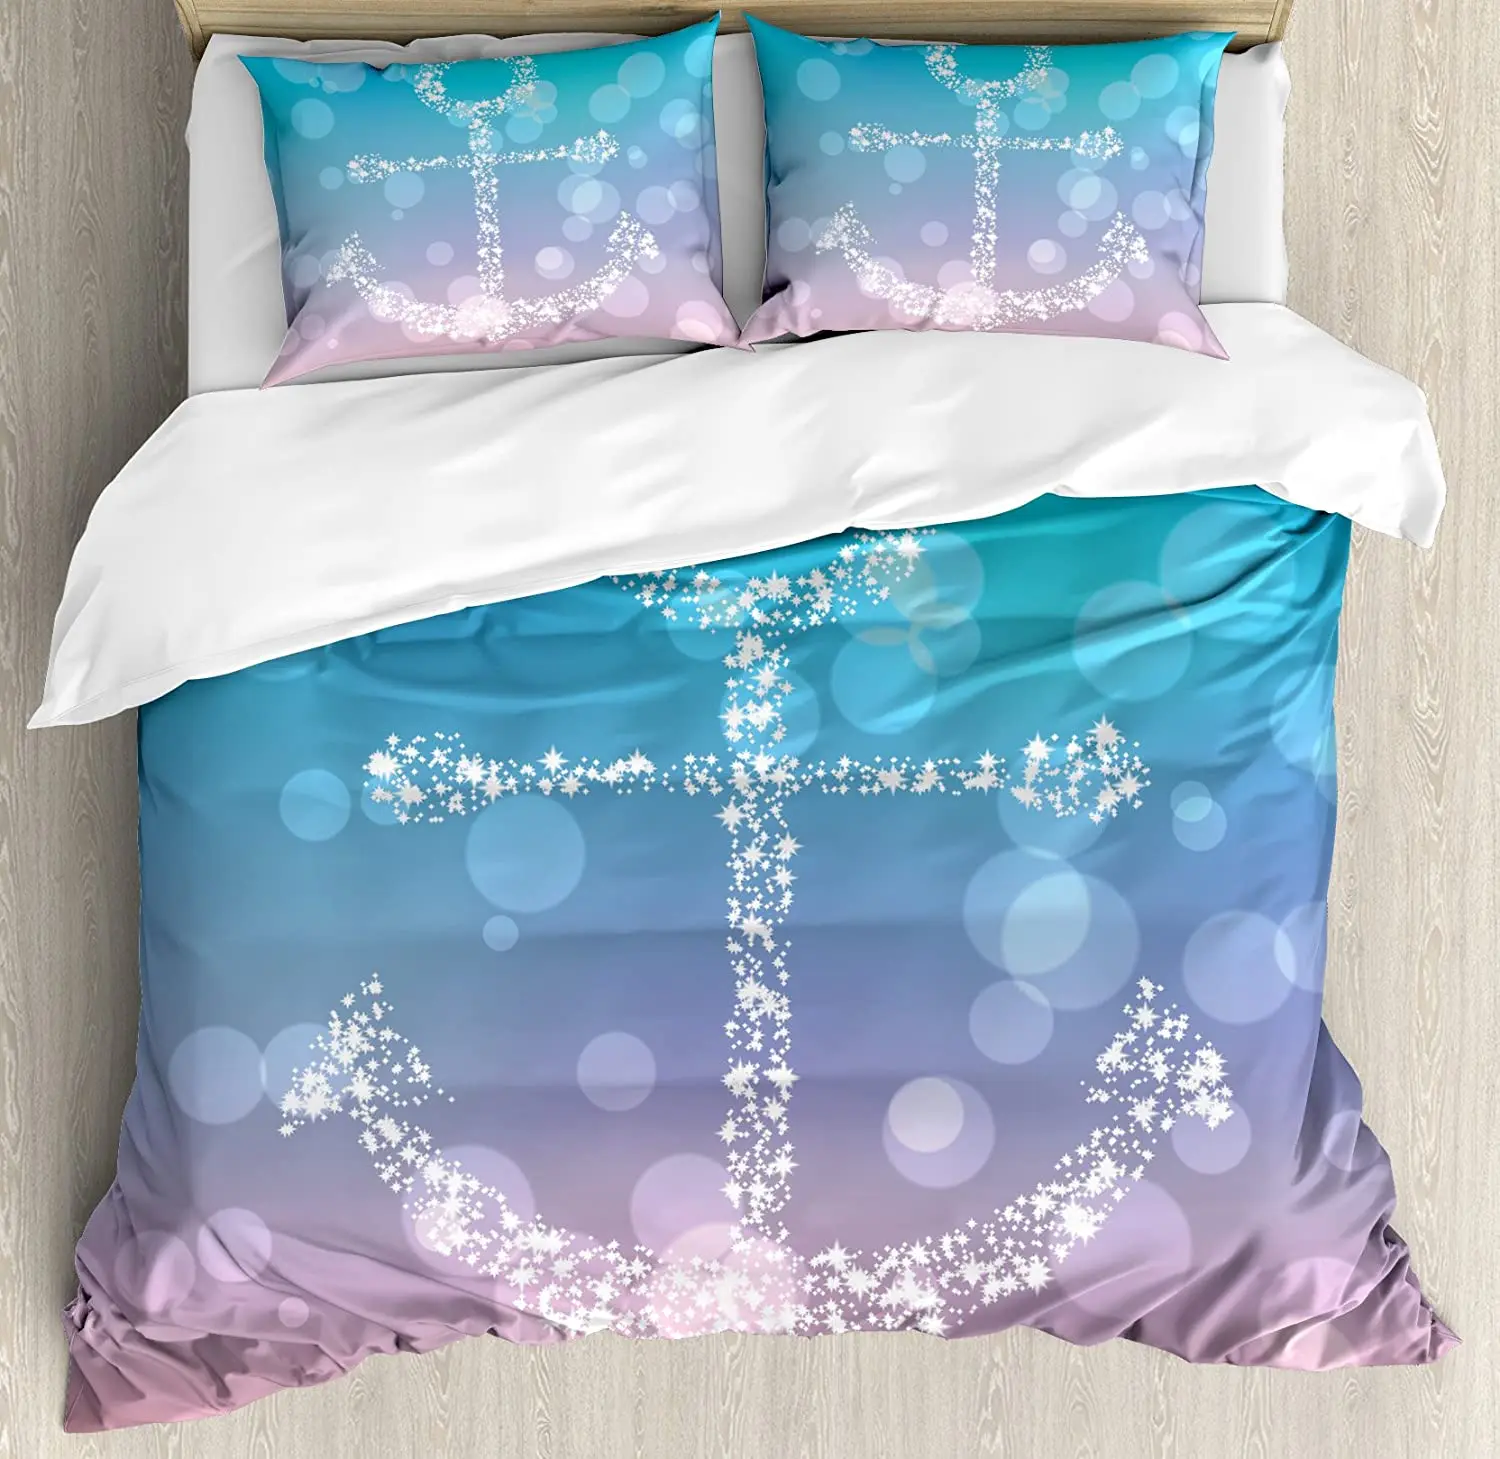 

Anchor Bed Duvet Cover Set Starry Fairy Anchor with Bubbles on Gradient Blurry Scenery Bokeh Marine Element Artprint Bedding Set